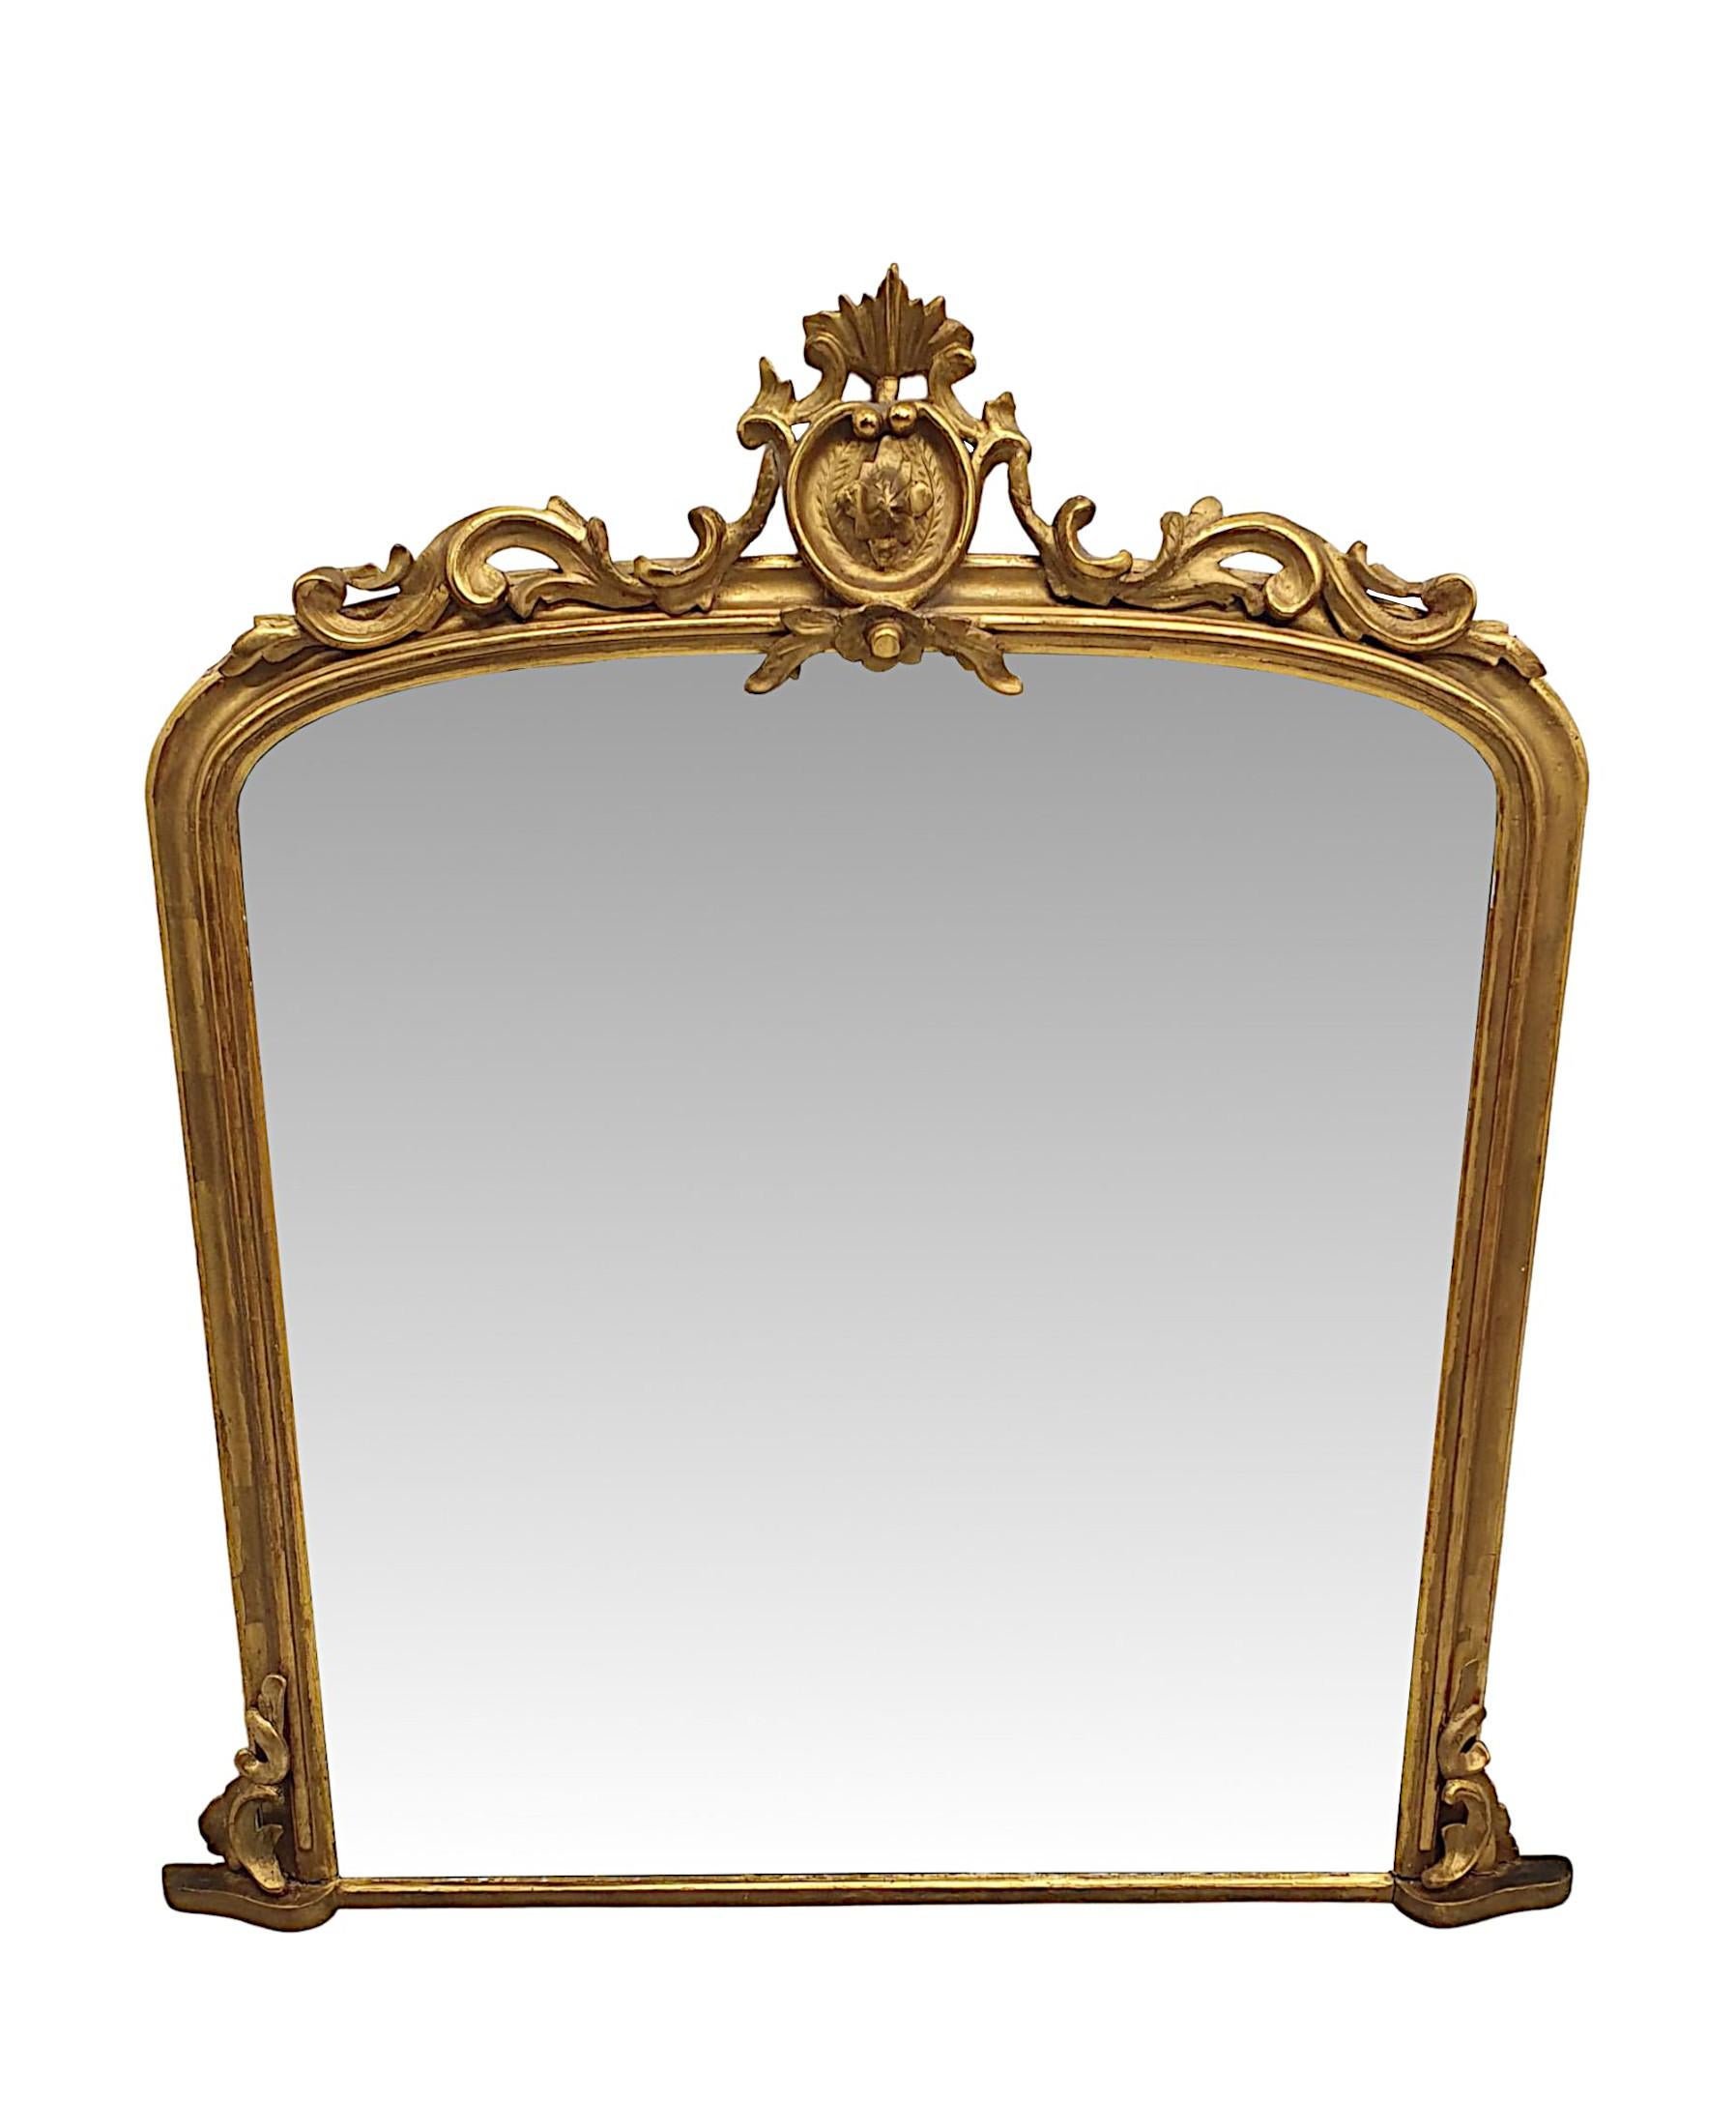 Fabulous 19th Century Giltwood Arch Top Overmantle Mirror In Good Condition For Sale In Dublin, IE